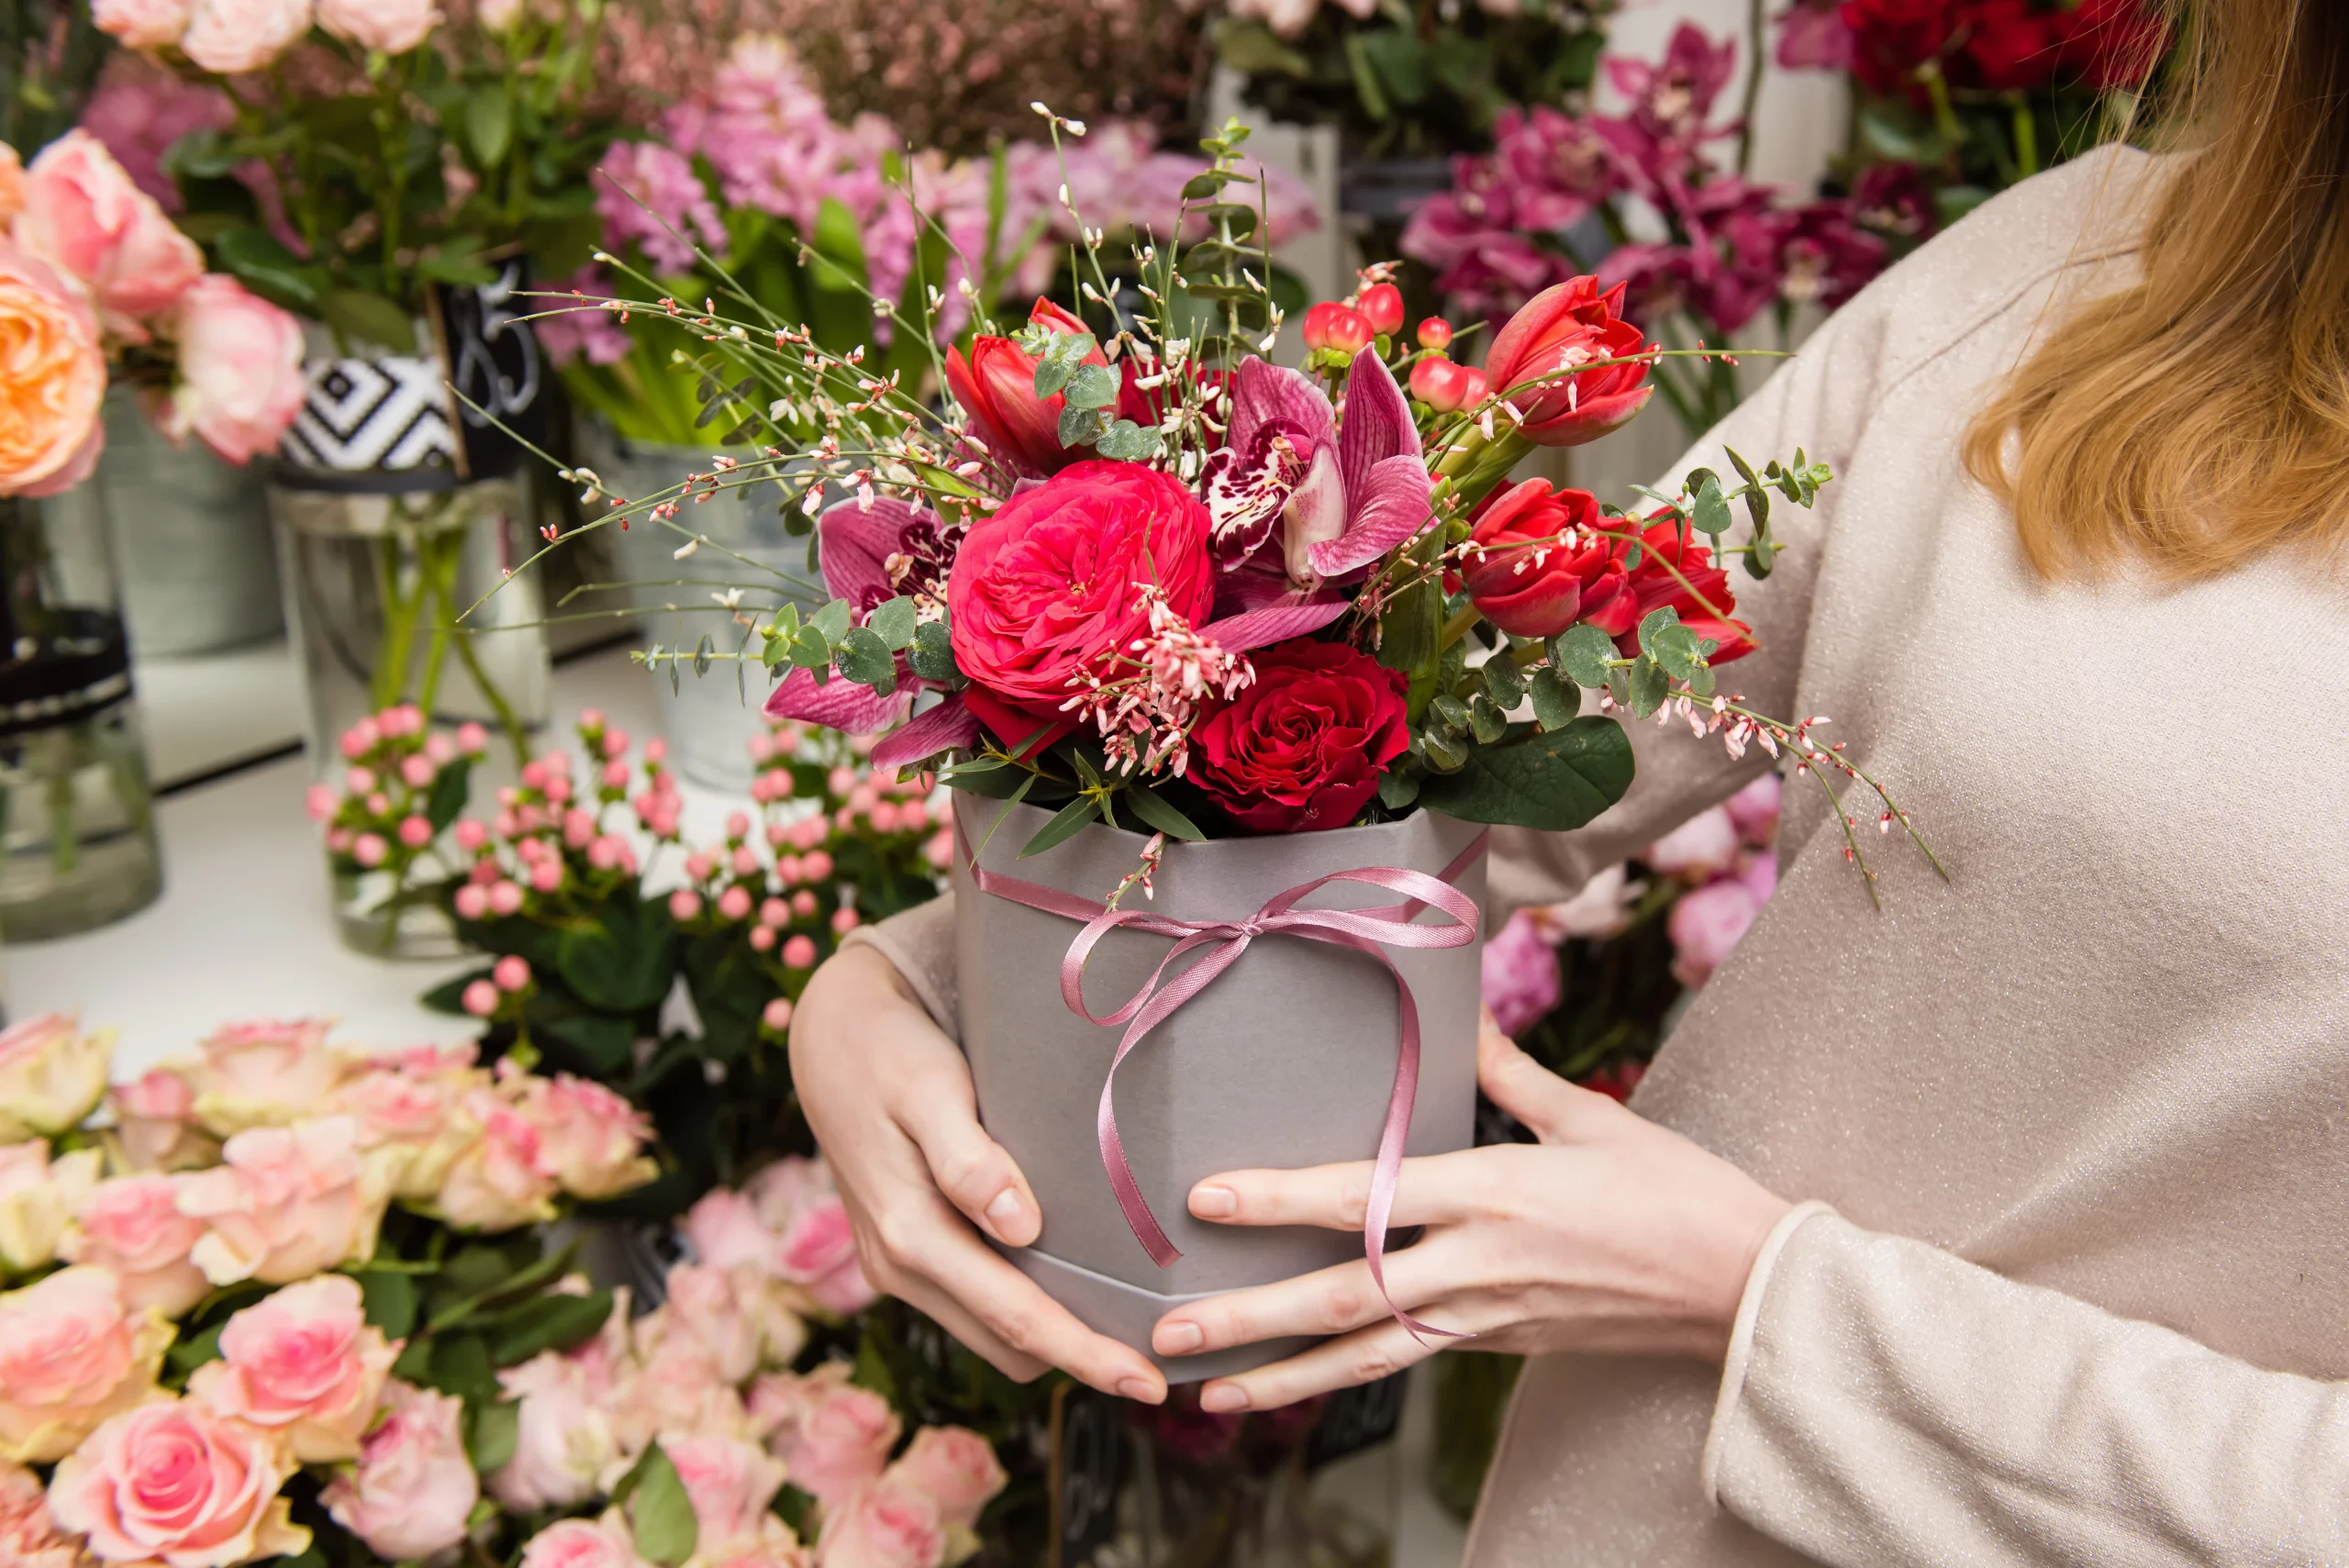 Anniversary Flower Delivery Singapore - https://beato.com.sg/